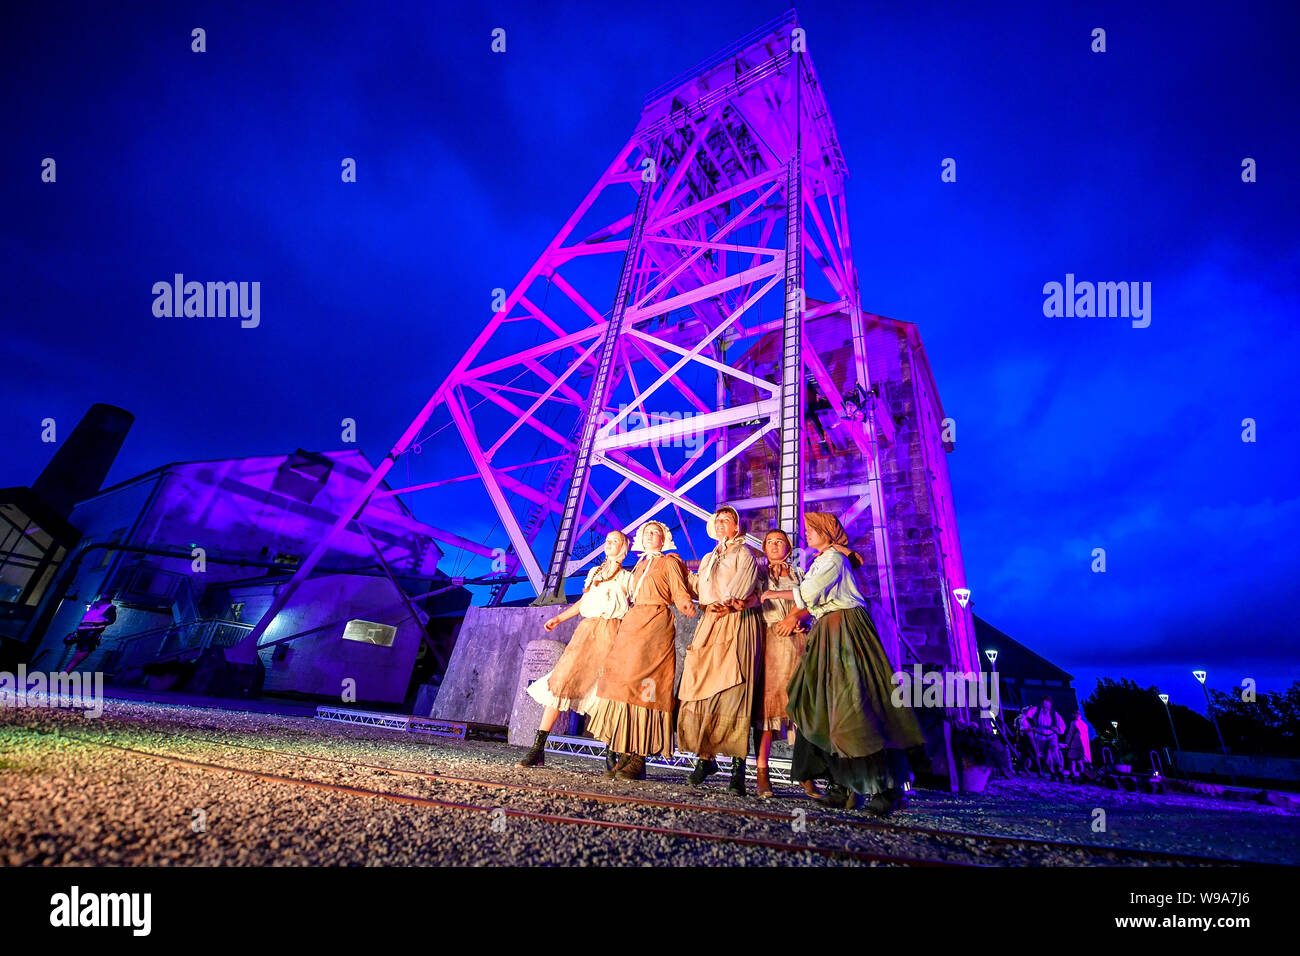 Performers rehearse around the base of a mining pit headframe in between acts of the theatrical performance of Estah???s Story, which is set in the old mine workings at Heartlands World Heritage Site, Cornwall, featuring aerial performances, song and spoken word, retelling stories from the Cornish mining industry in the 1800s. Stock Photo